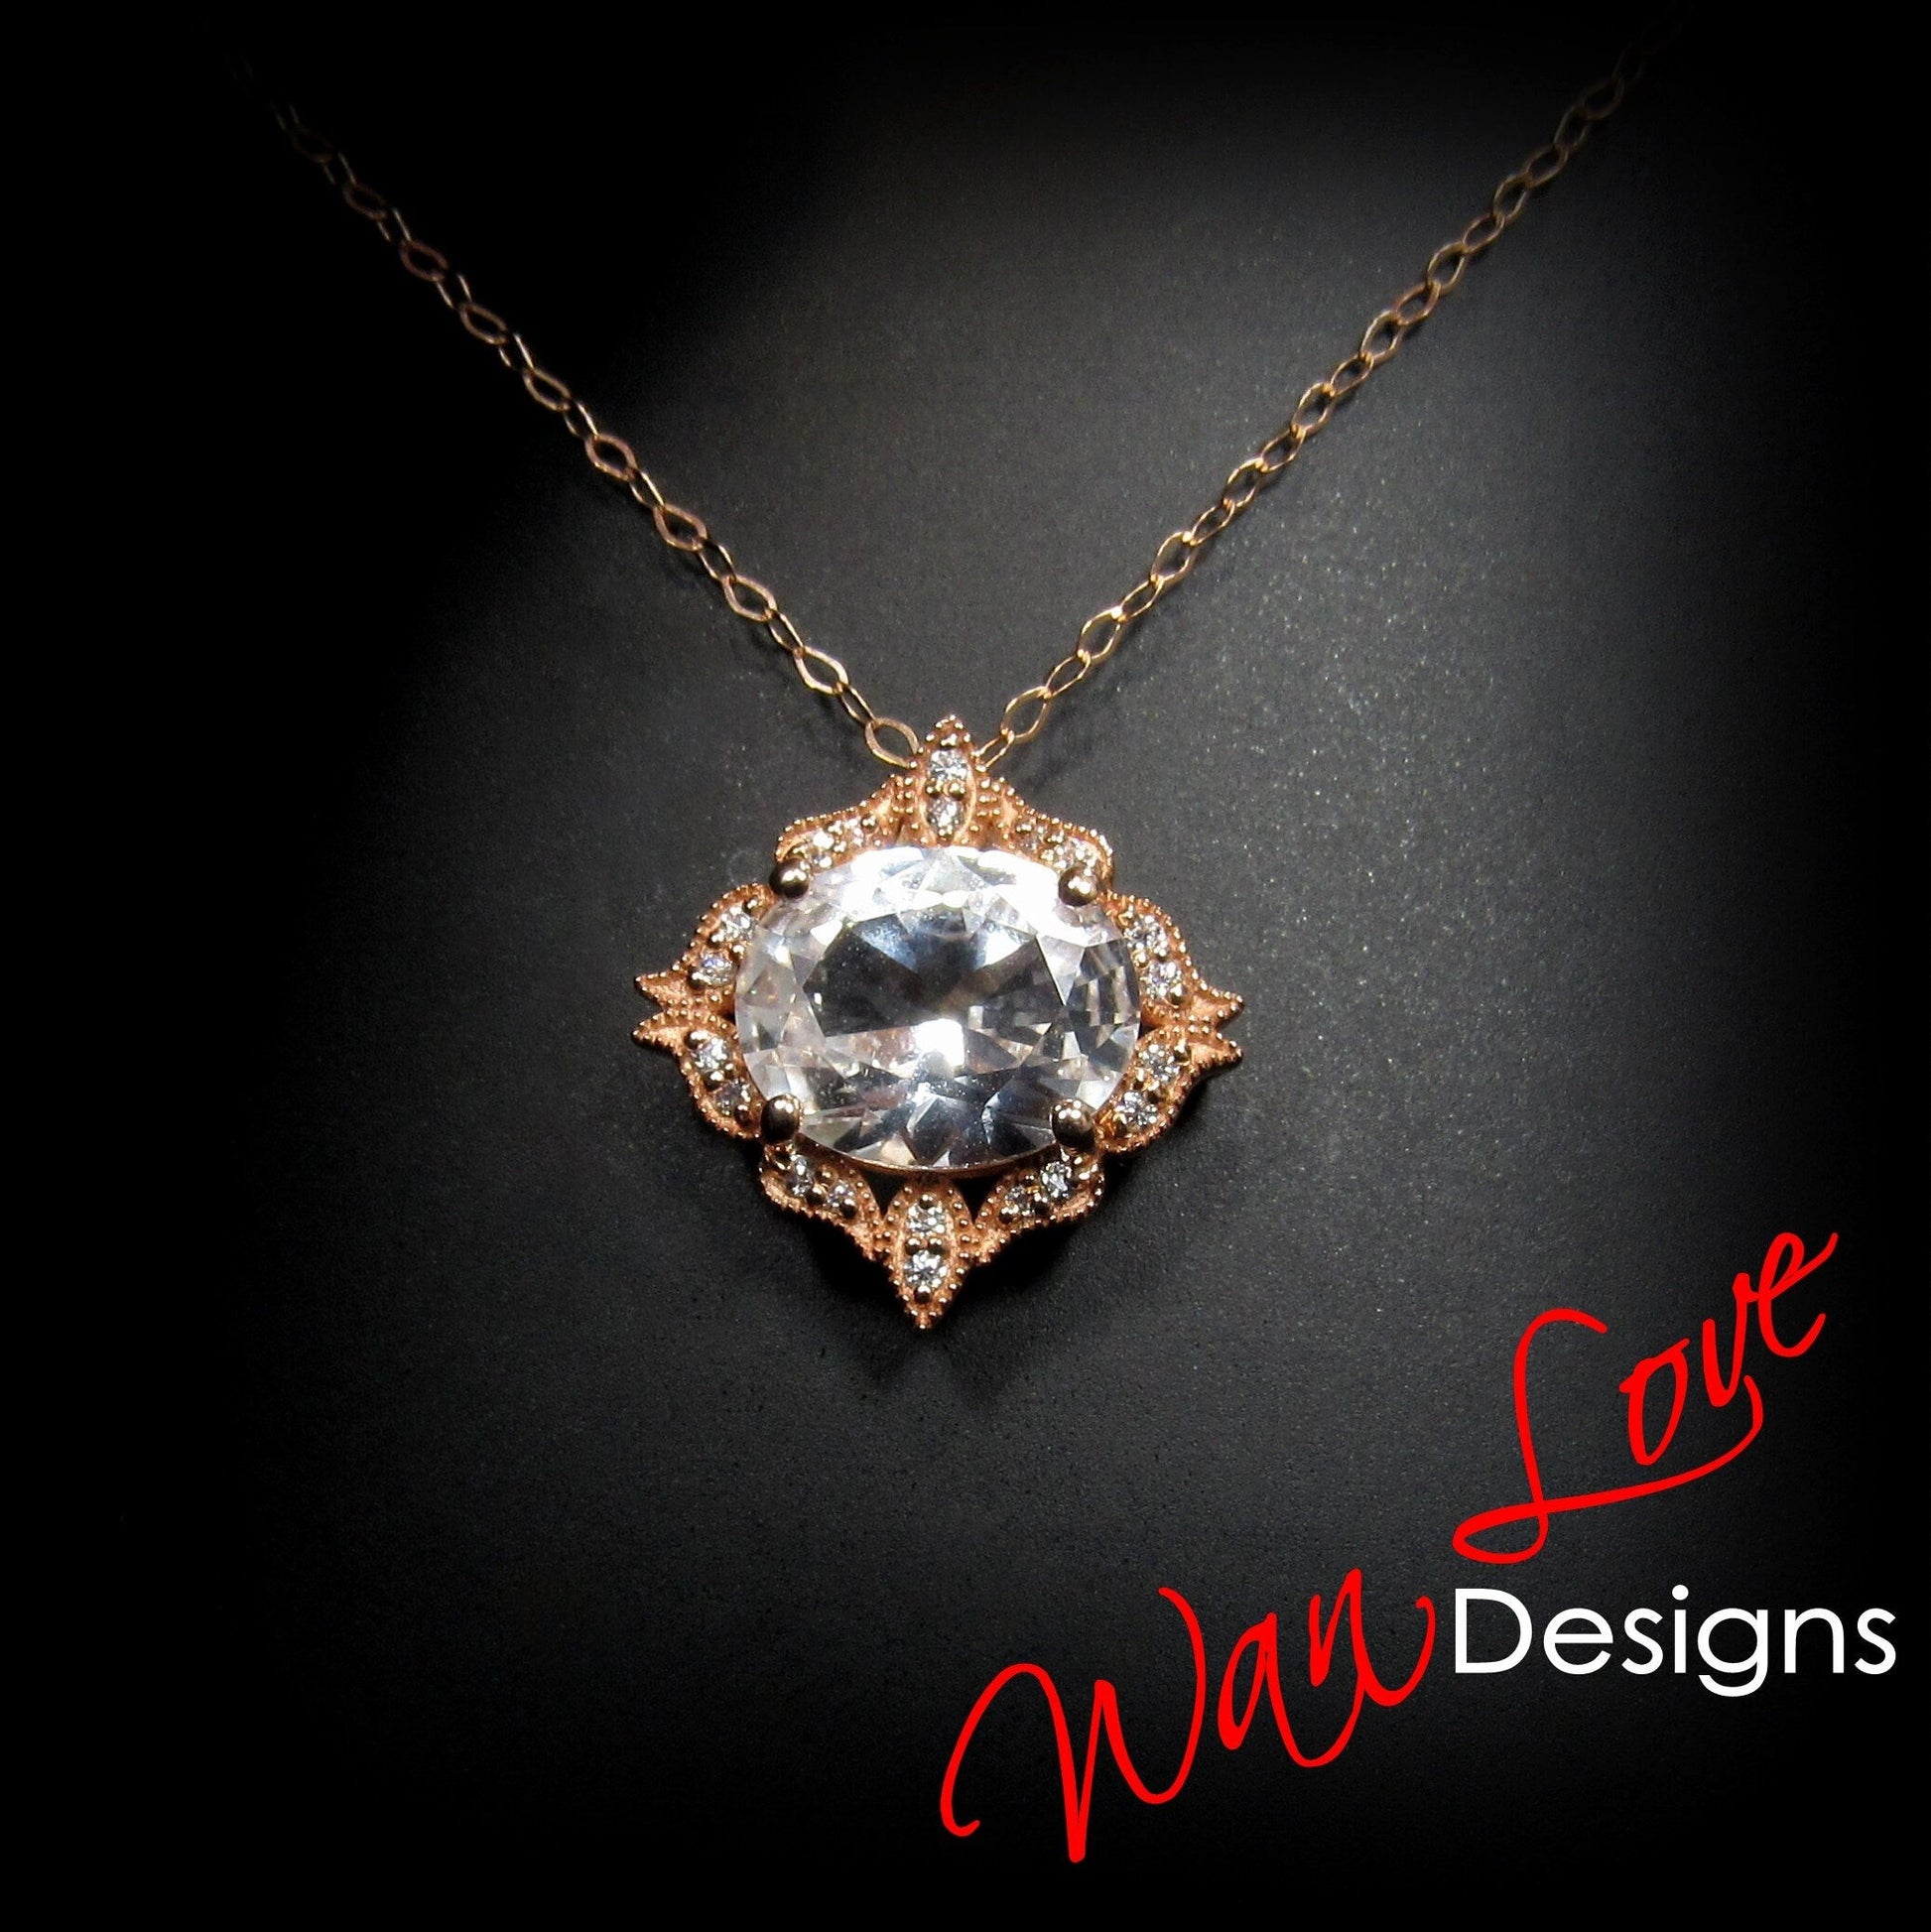 Art deco White Sapphire charm Necklace Unique vintage Moissanite halo Bridal pendant Oval cut floral Wedding Day Anniversary jewelry gift Wan Love Designs